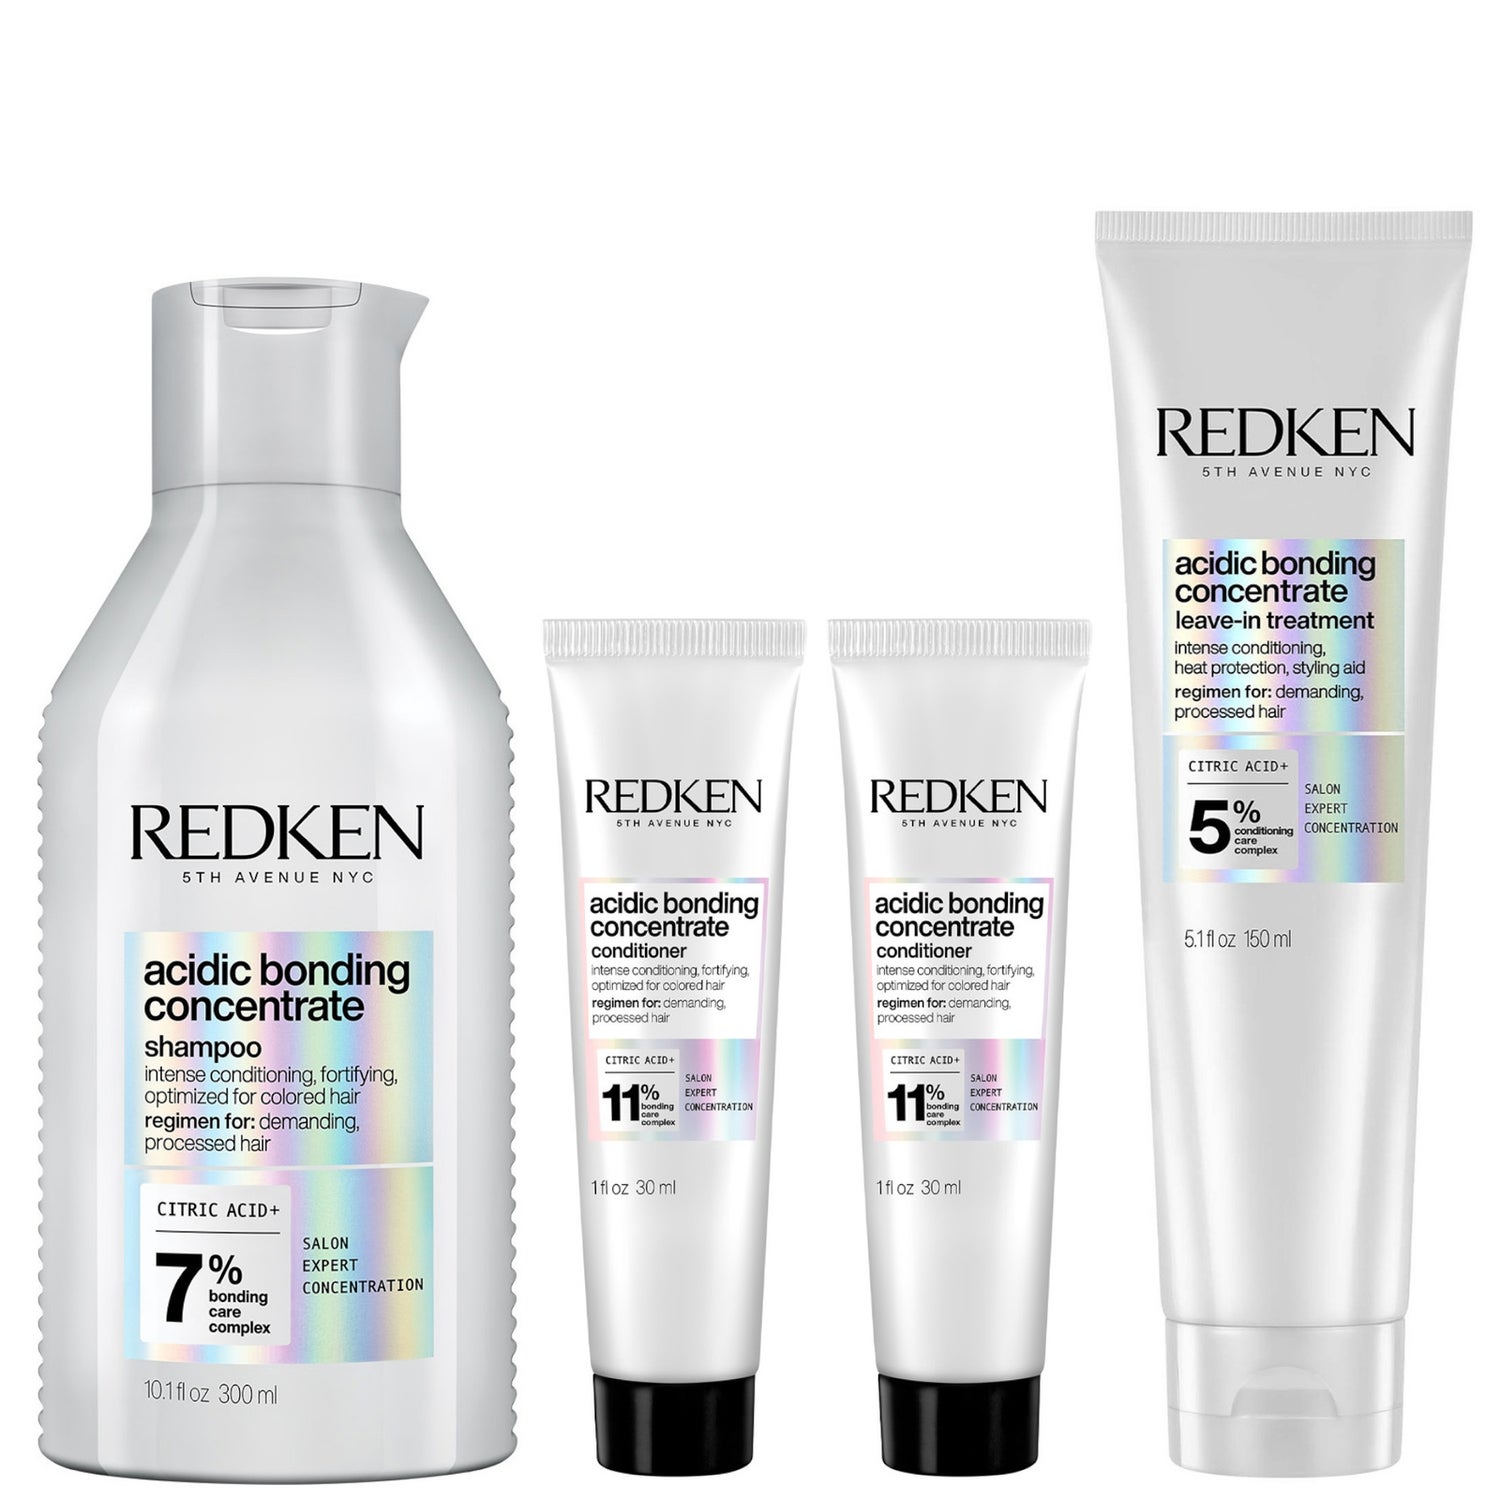 Redken Acidic Bonding Concentrate Shampoo 300ml, 2x Conditioner 30ml, and Leave-in Hair Treatment 150ml Bundle (Worth £56.54)